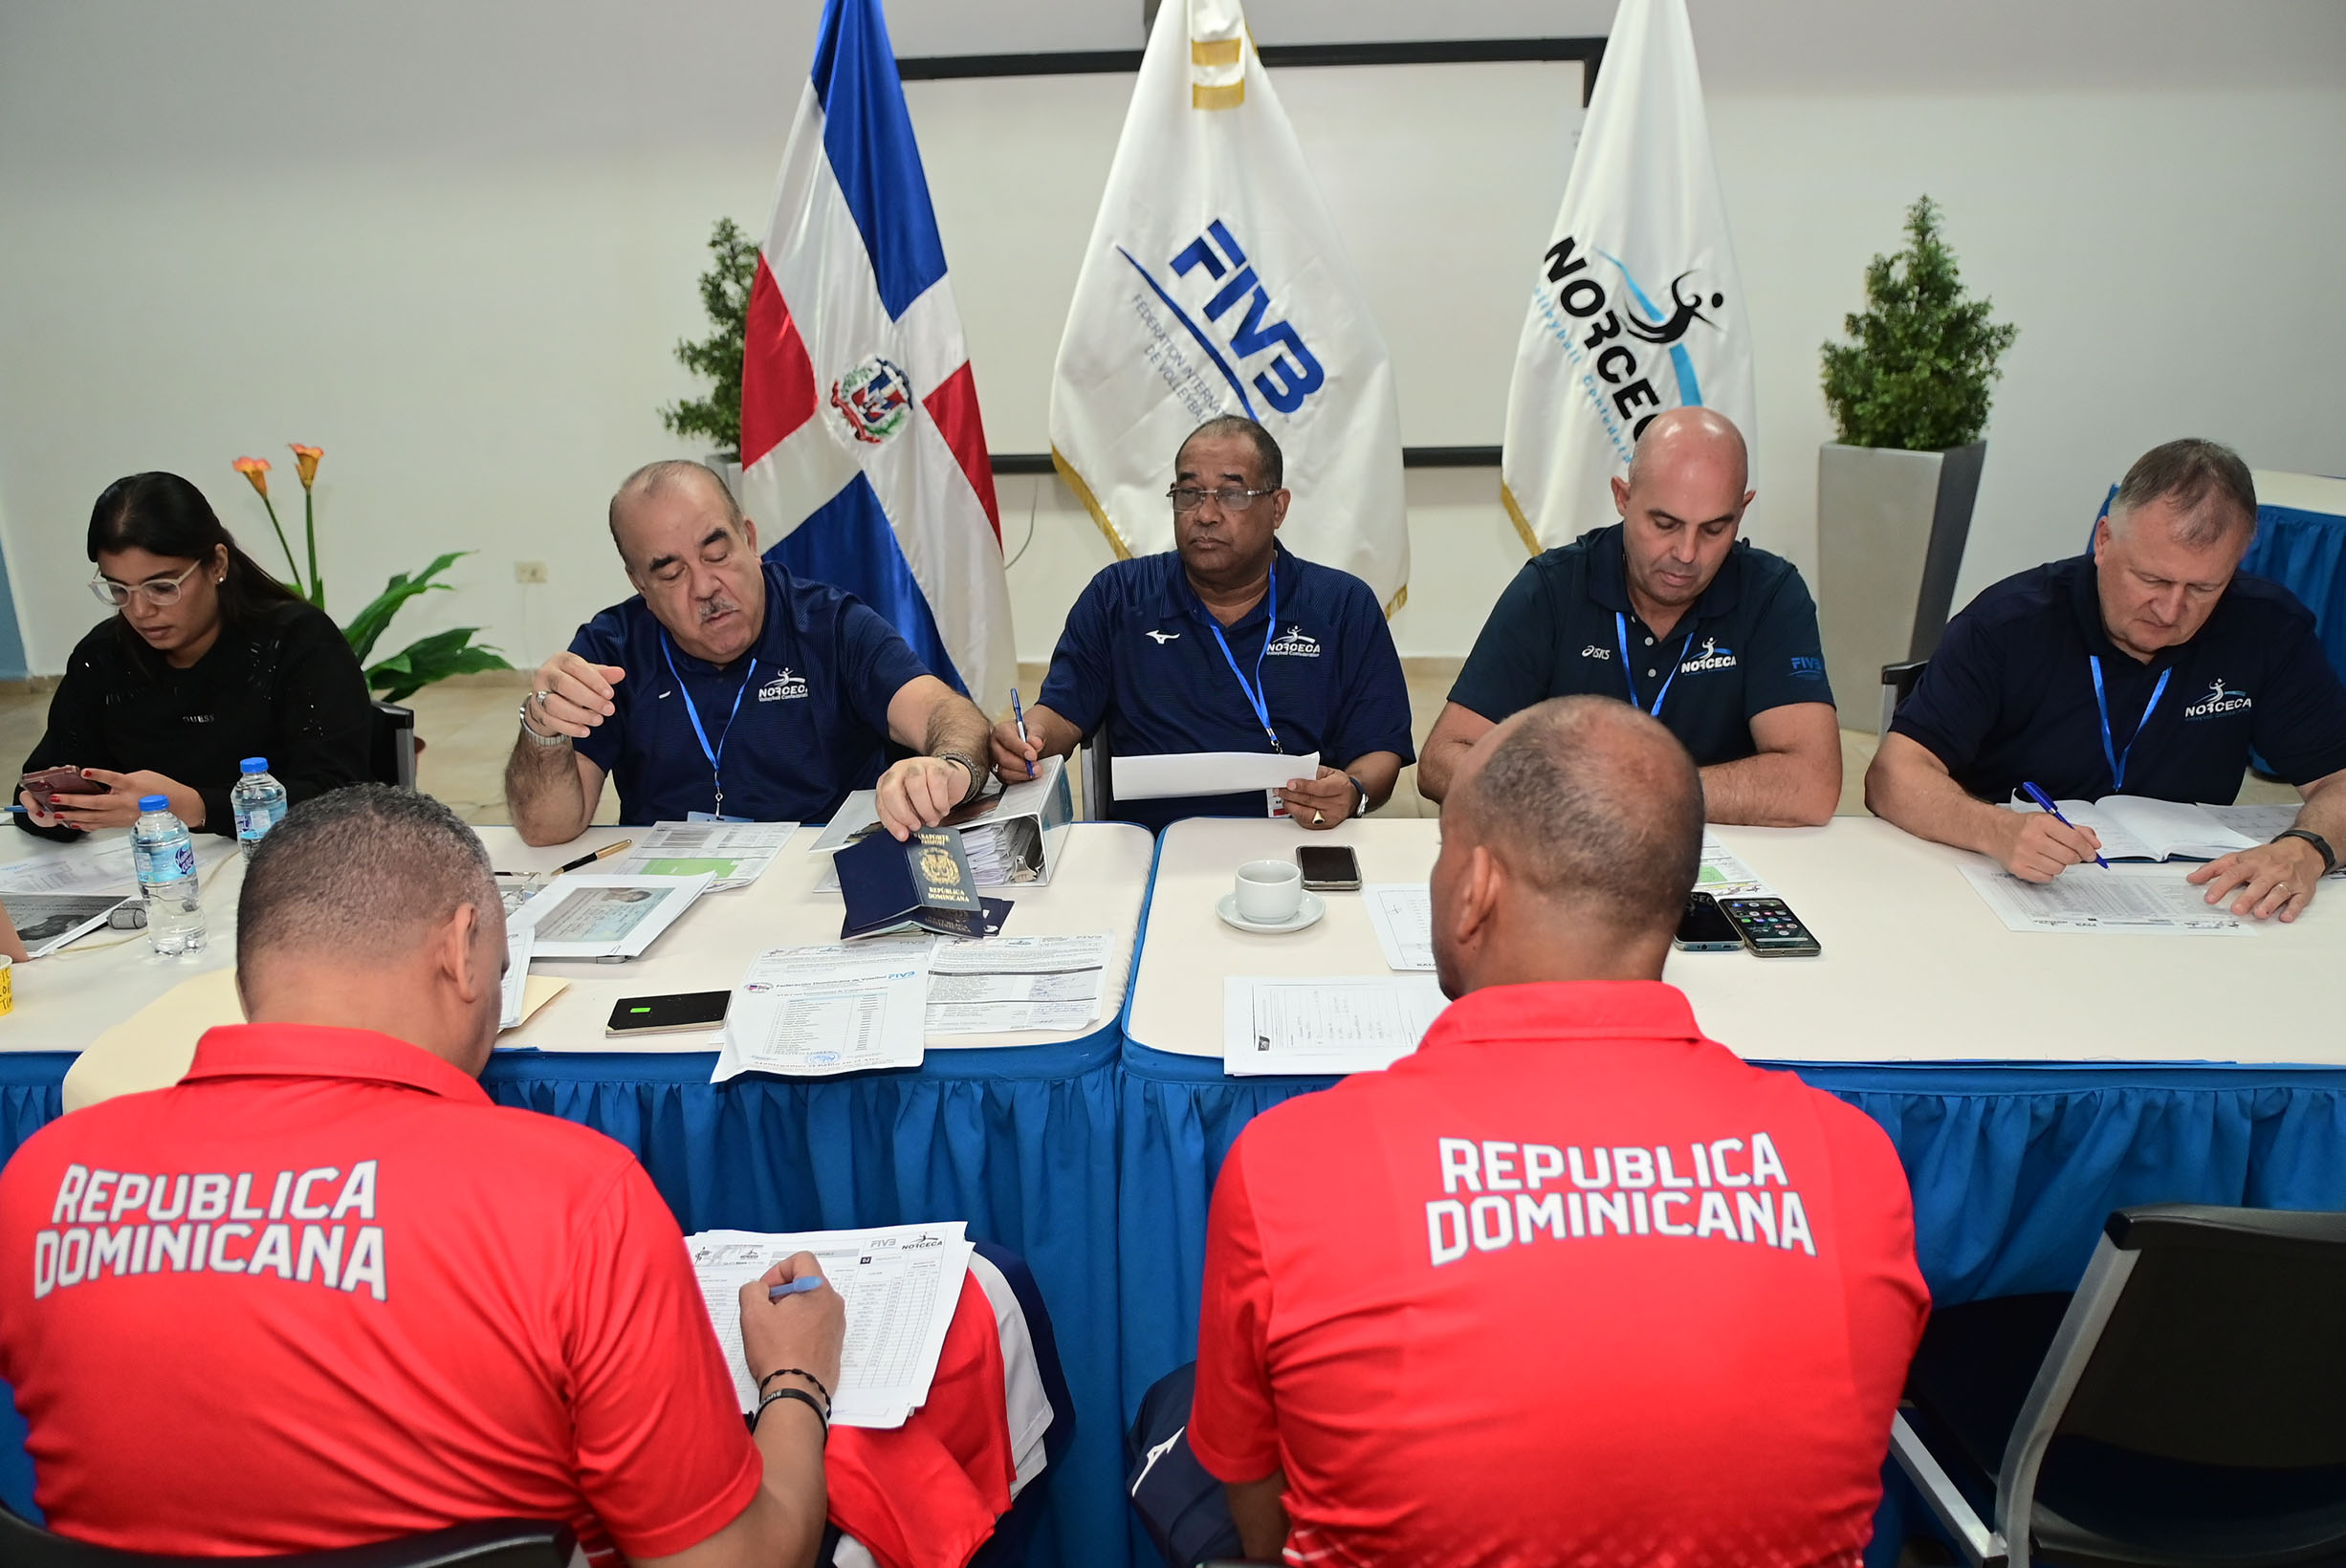 Coaches reveal expectations for the XVII Men’s Pan American Cup